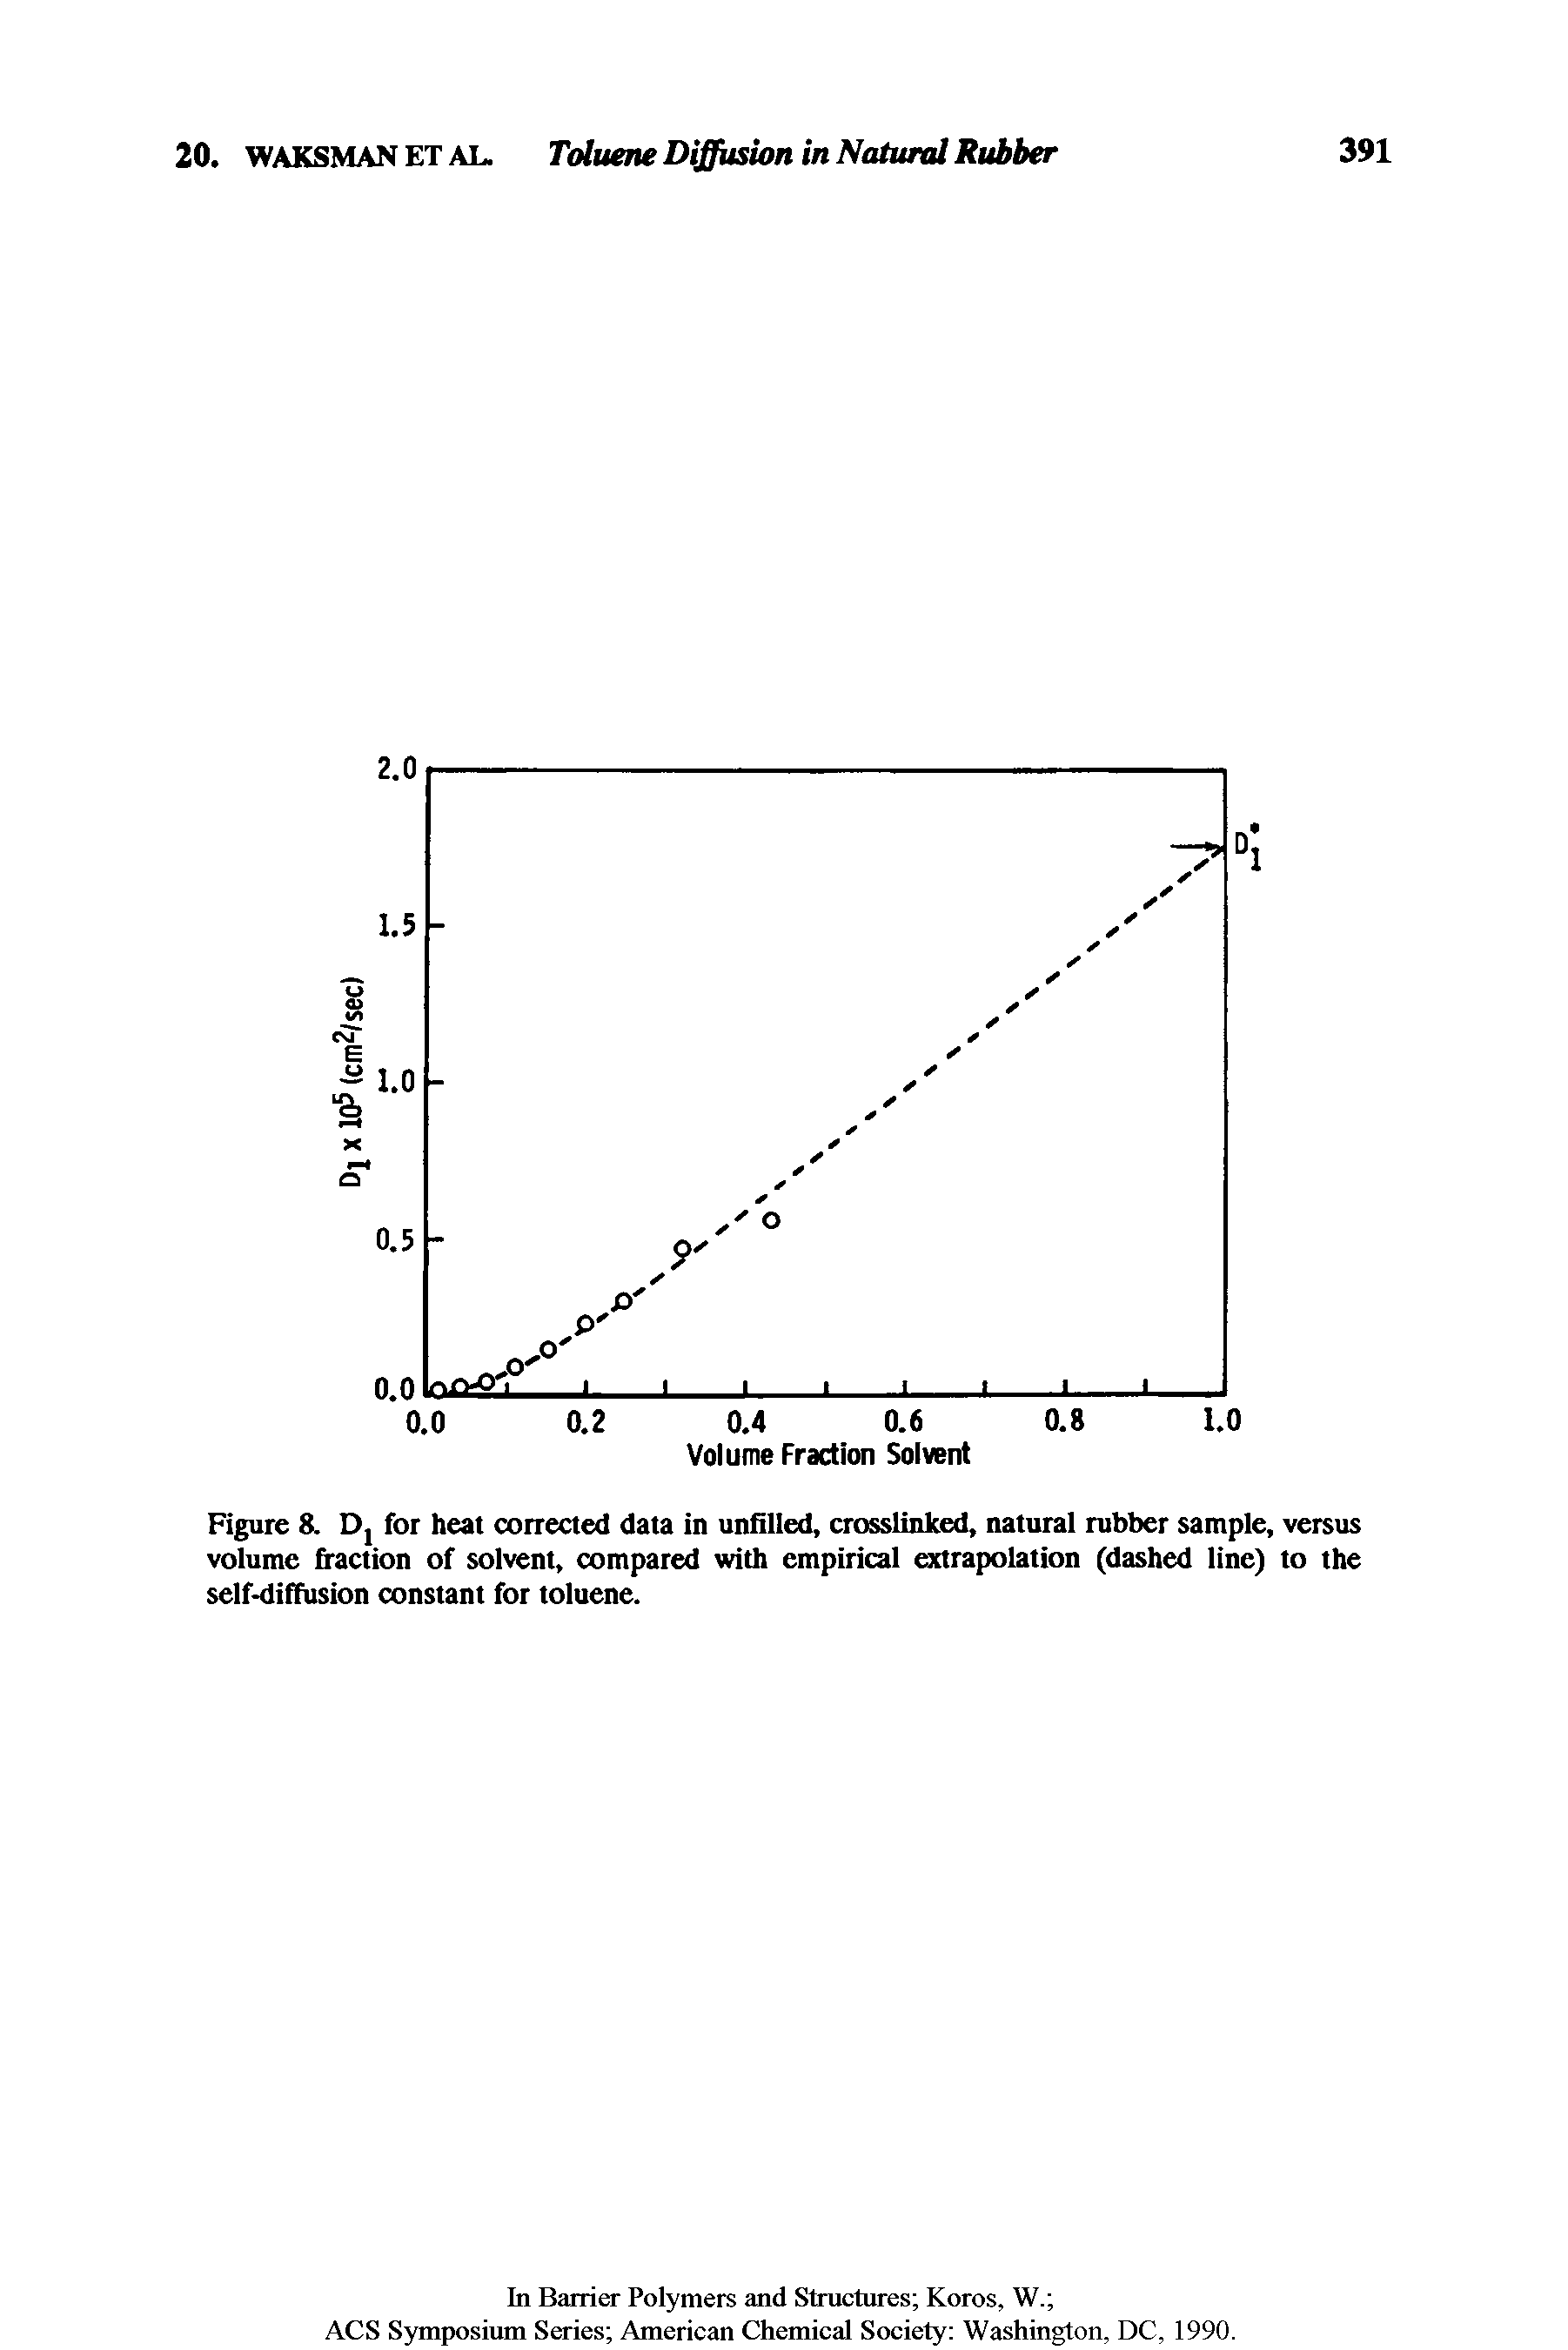 Figure 8. Dj for heat corrected data in unfilled, crosslinked, natural rubber sample, versus volume fraction of solvent, compared with empirical extrapolation (dashed line) to the self-diffusion constant for toluene.